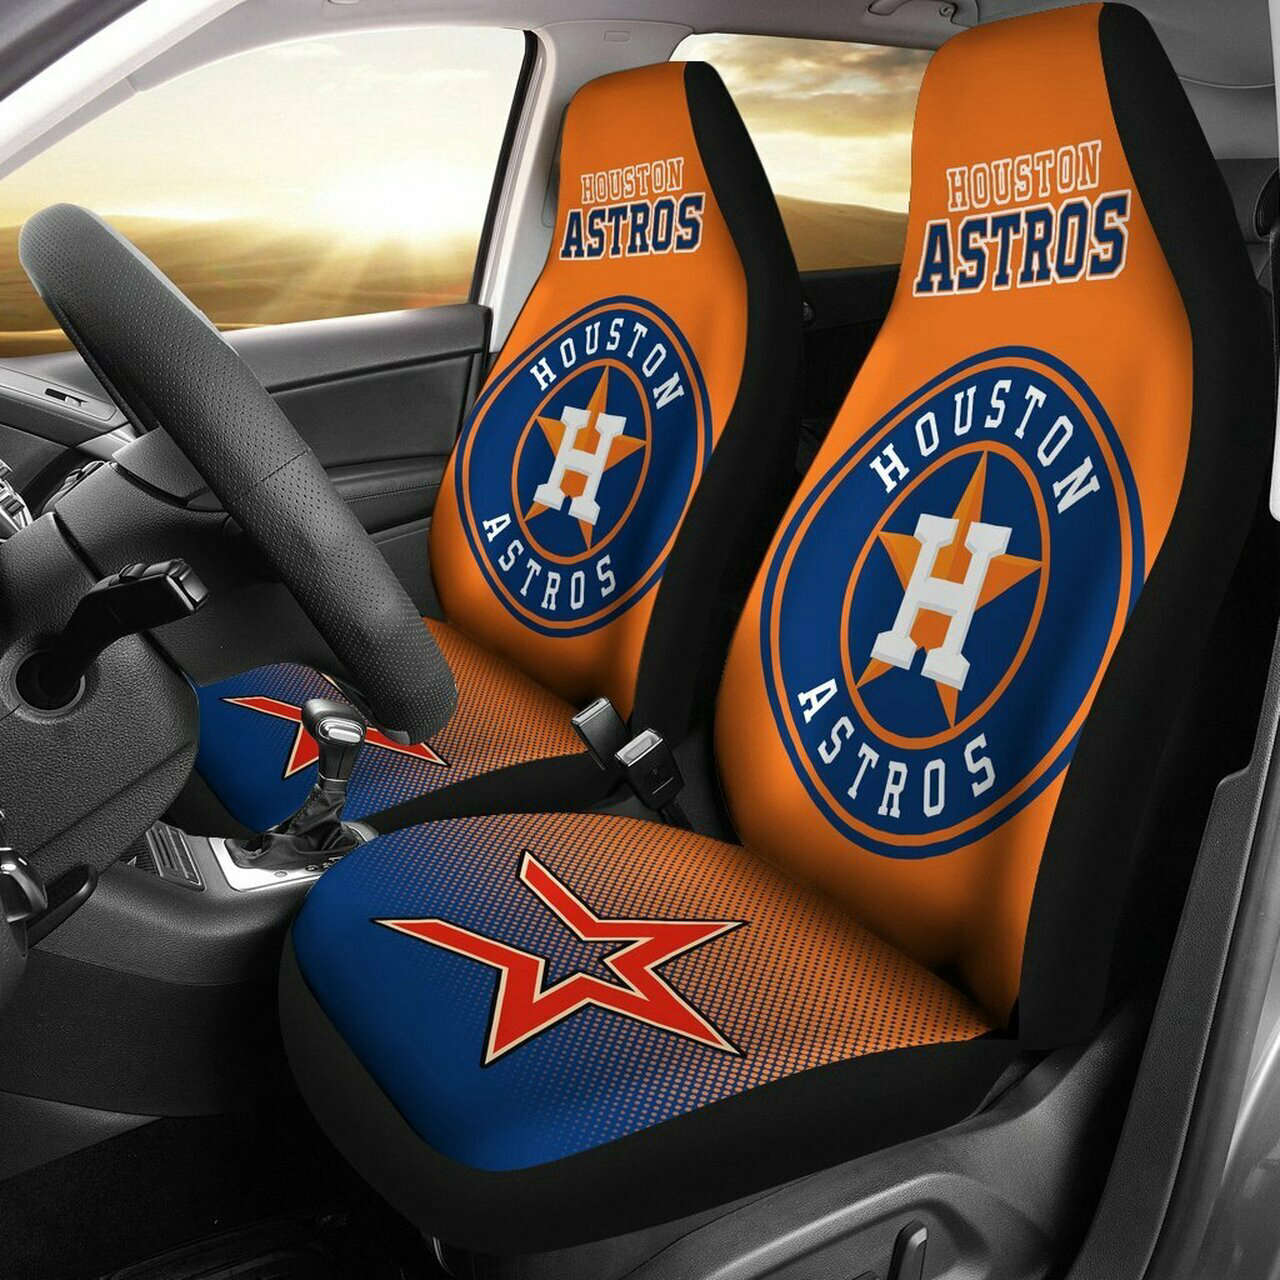 MLB Houston Astros Car Seat Covers – Game Day Travel Comfort for Fans